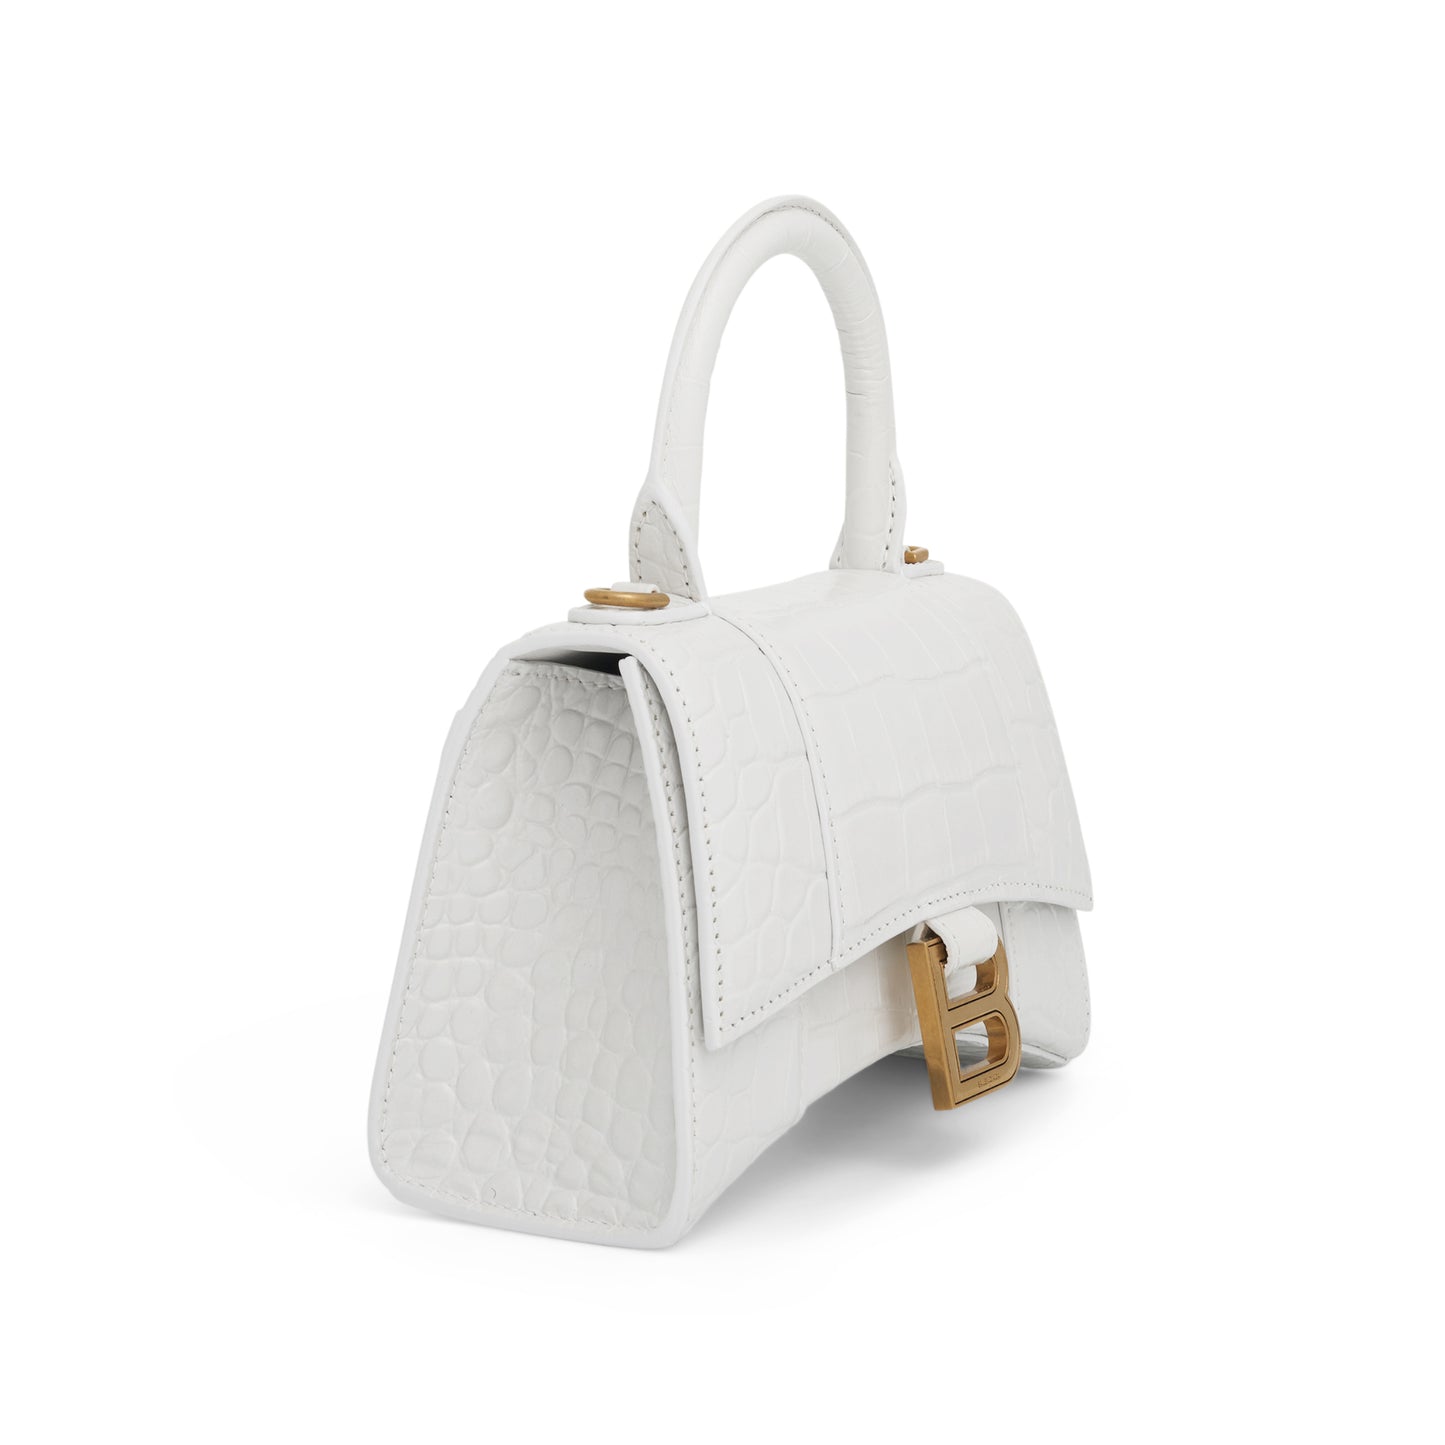 Hourglass XS Croco Embossed Bag in White with Gold Plague